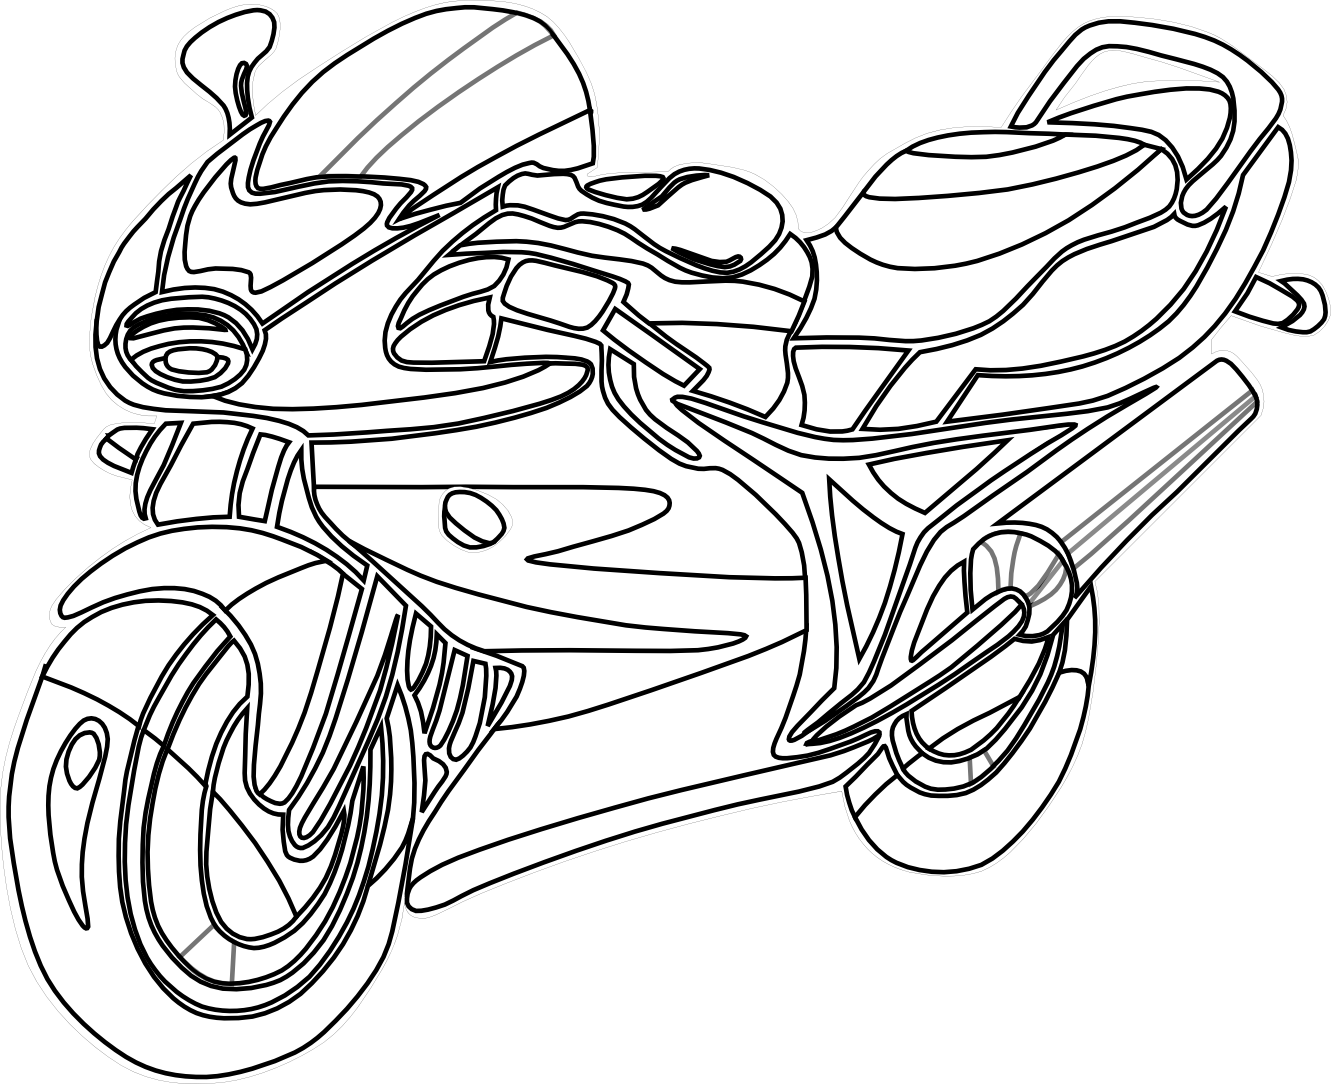 Motorcycle Clipart Black White Line Art Coloring Book Colouring ...